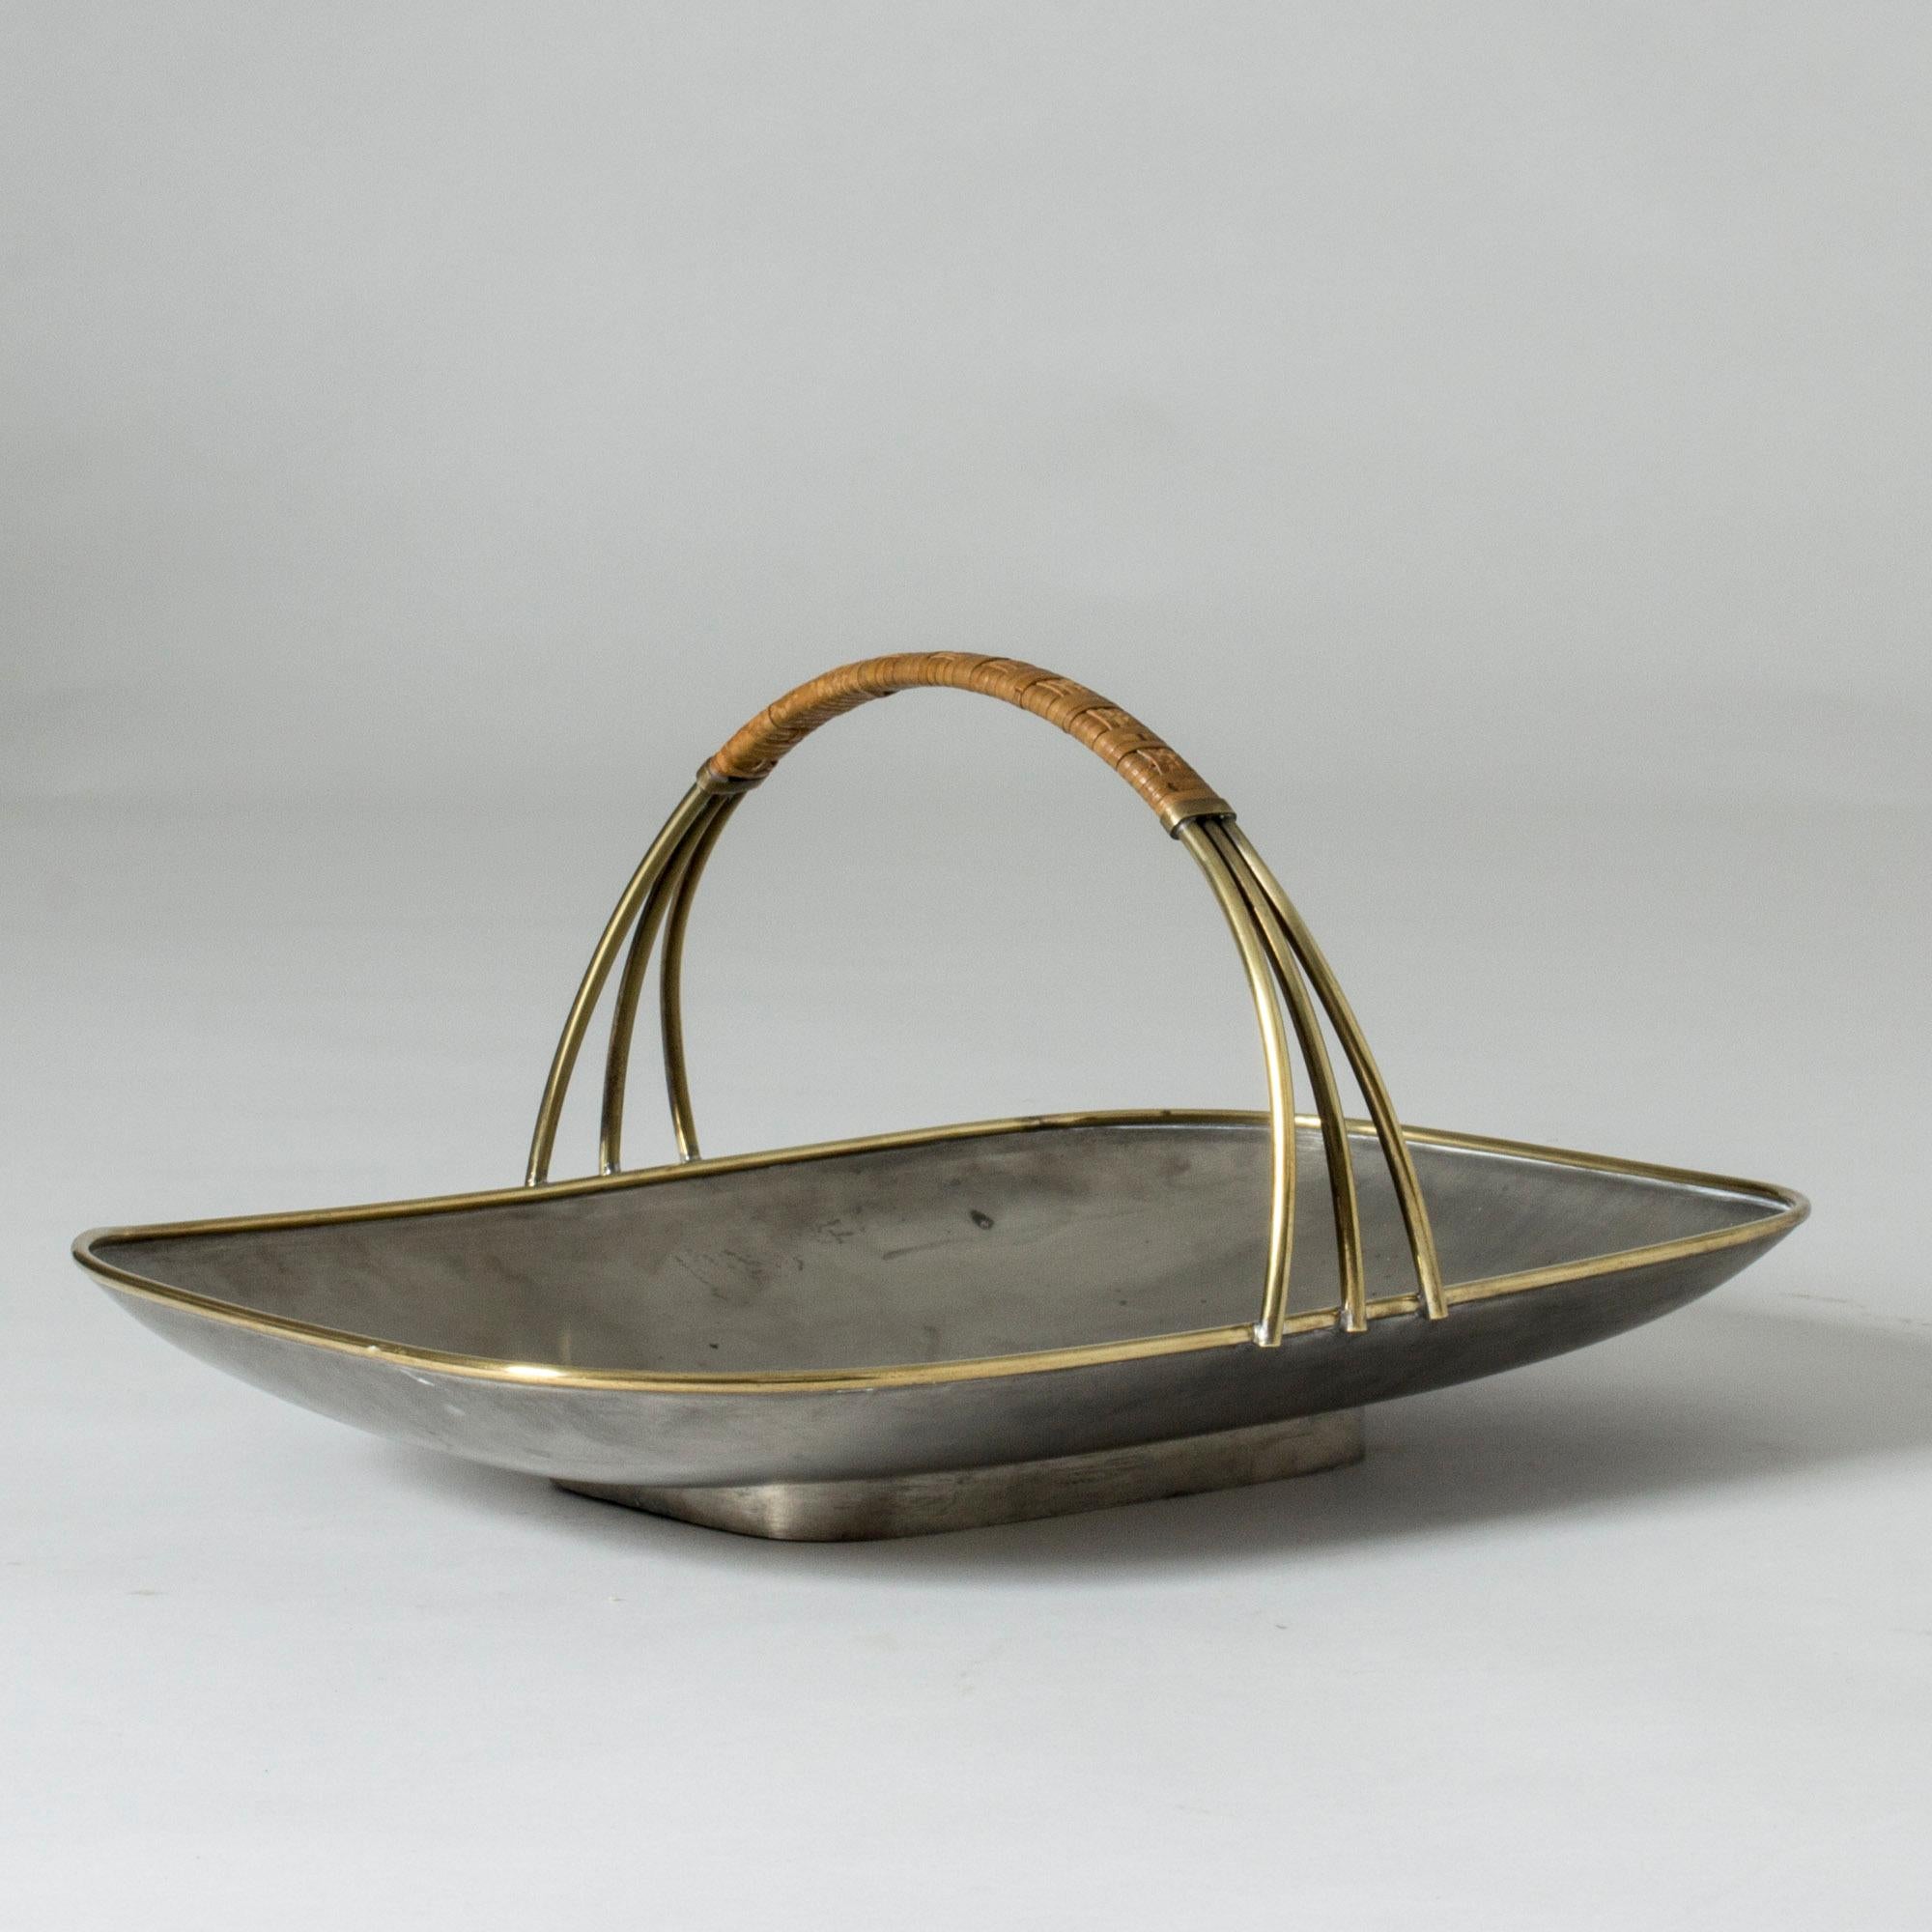 Scandinavian Modern 1940s Pewter Tray by Nils Fougstedt